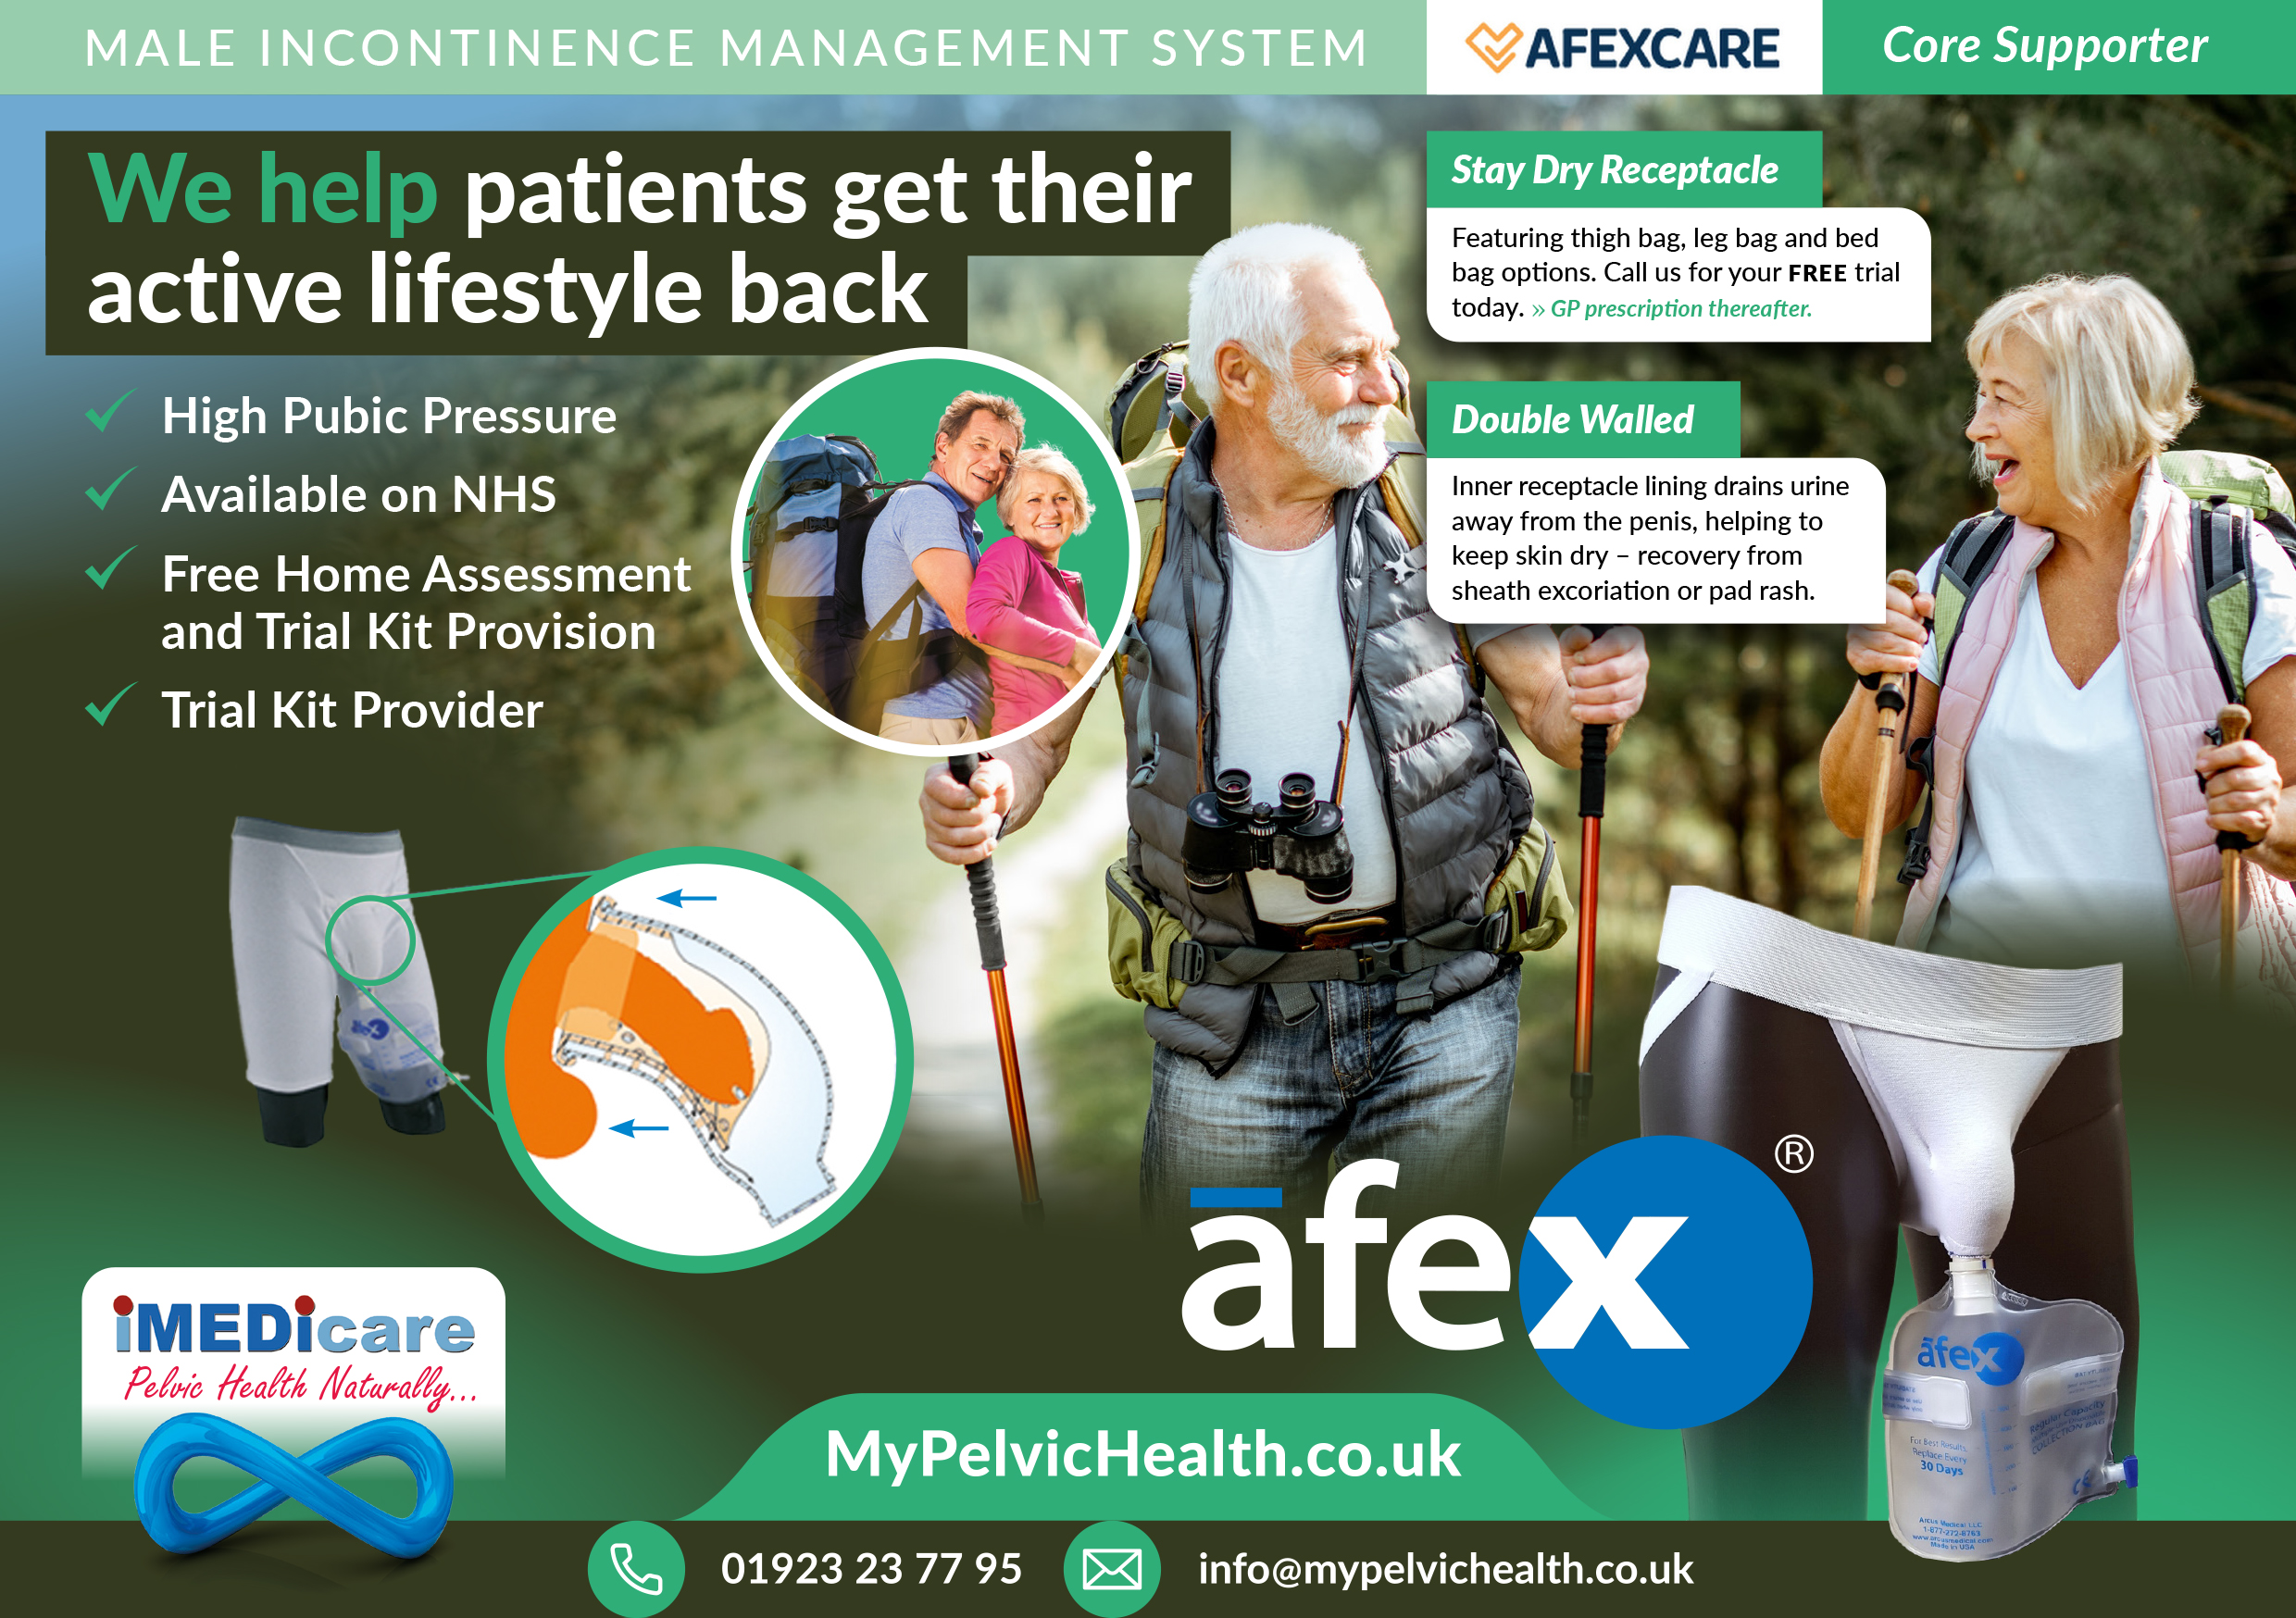 We help patients get their active lifestyles back